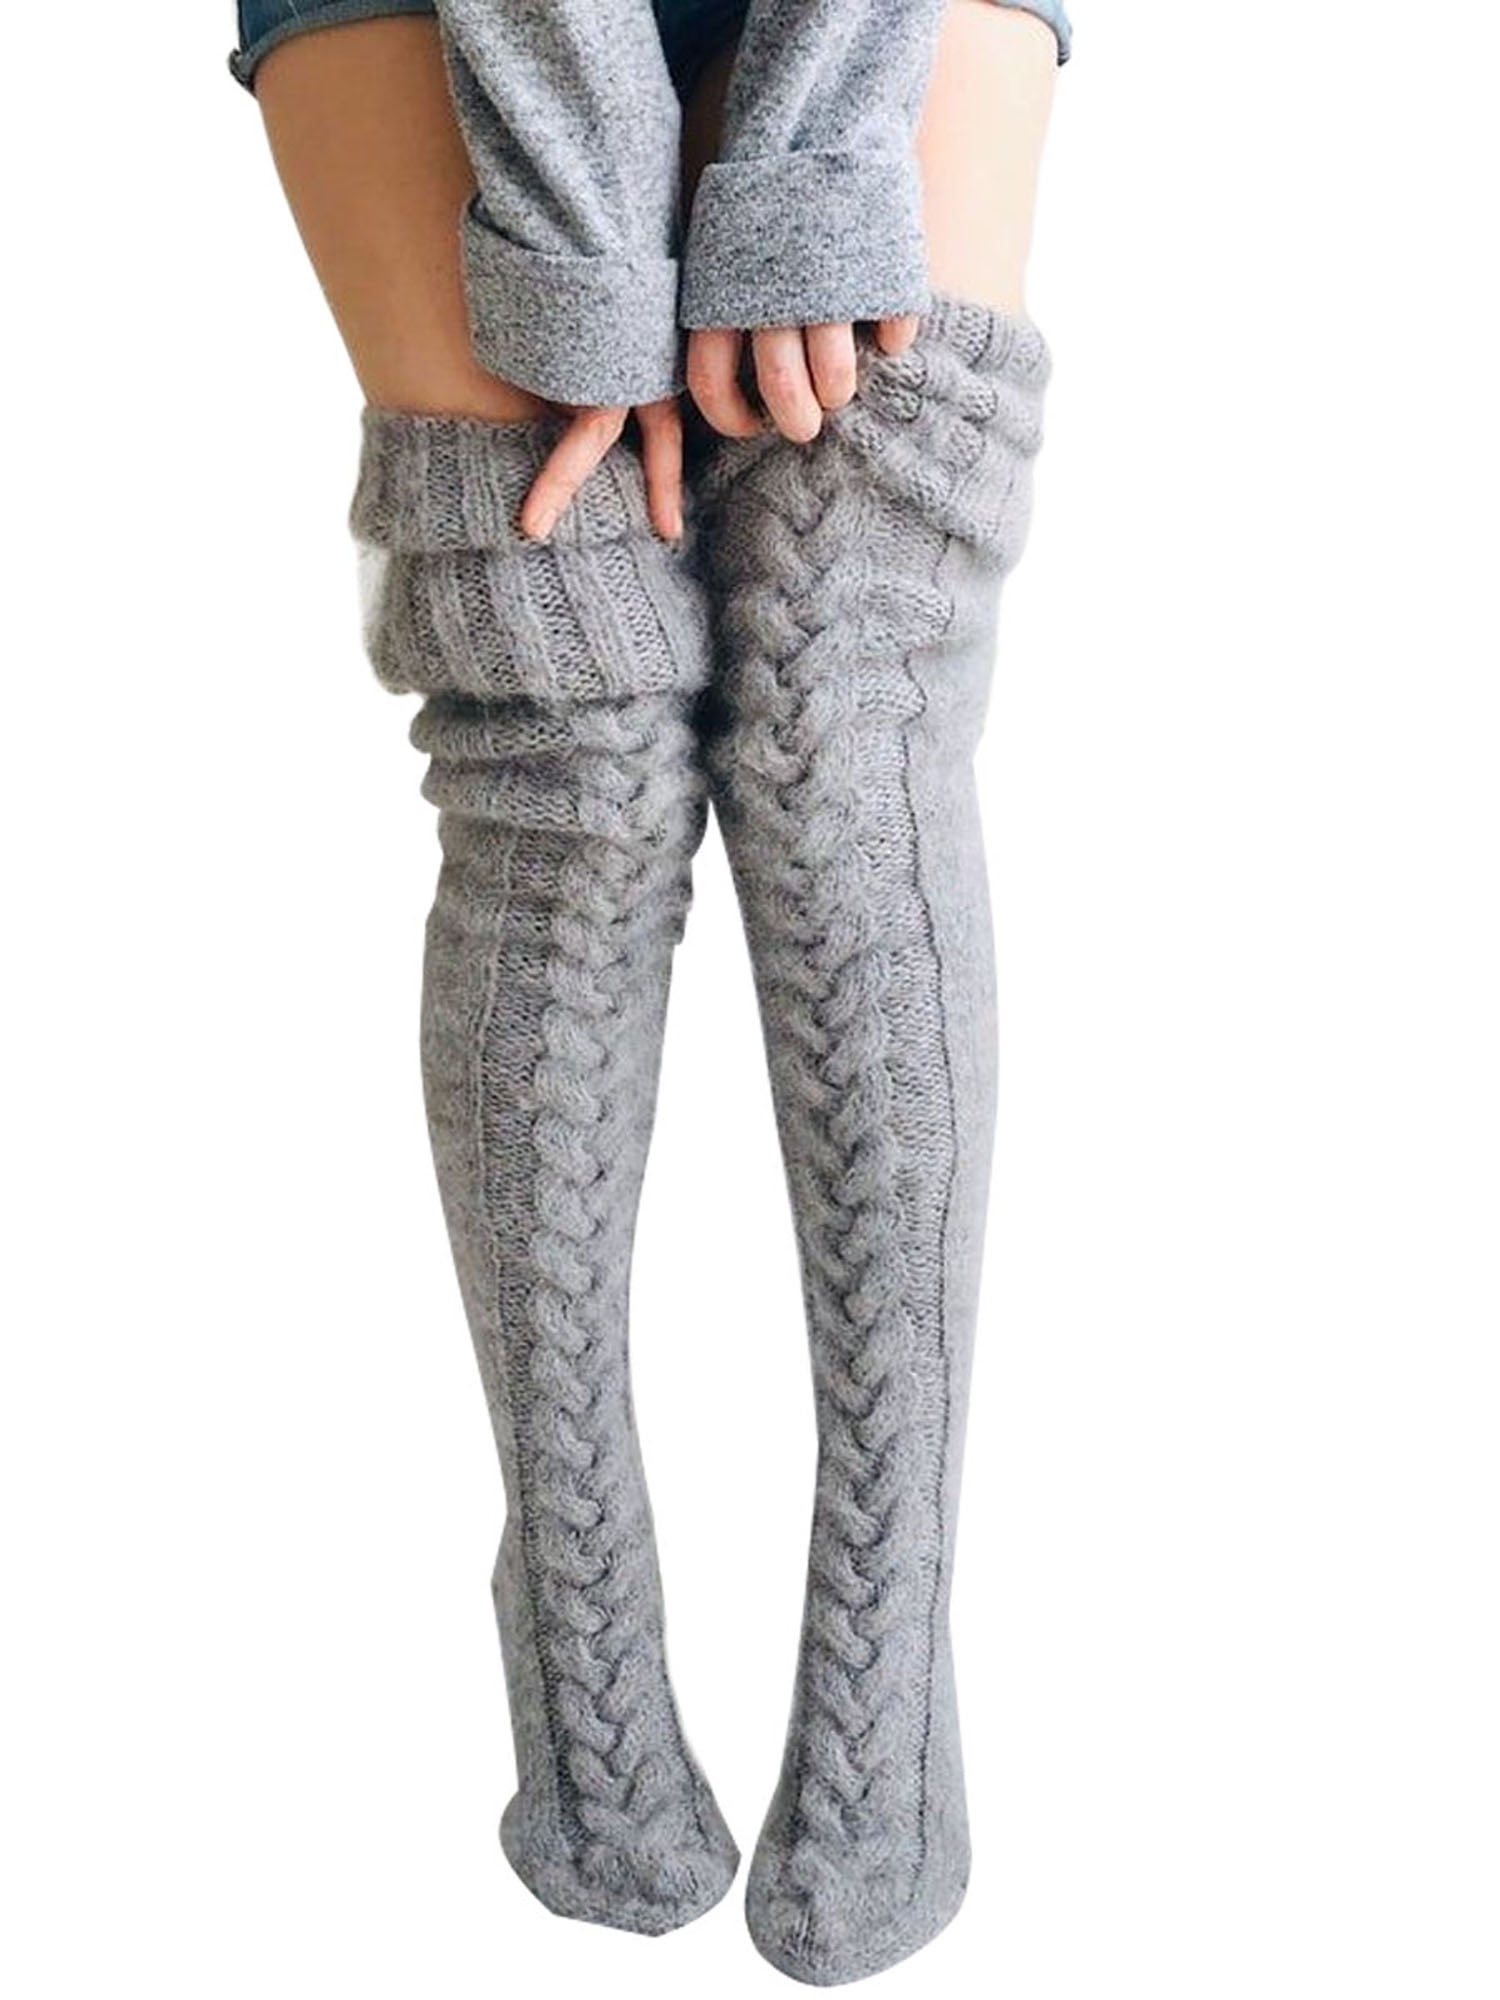 Ladies Women Wool Knit Thigh-High Over the Knee Socks Winter Long Stocking Warm 